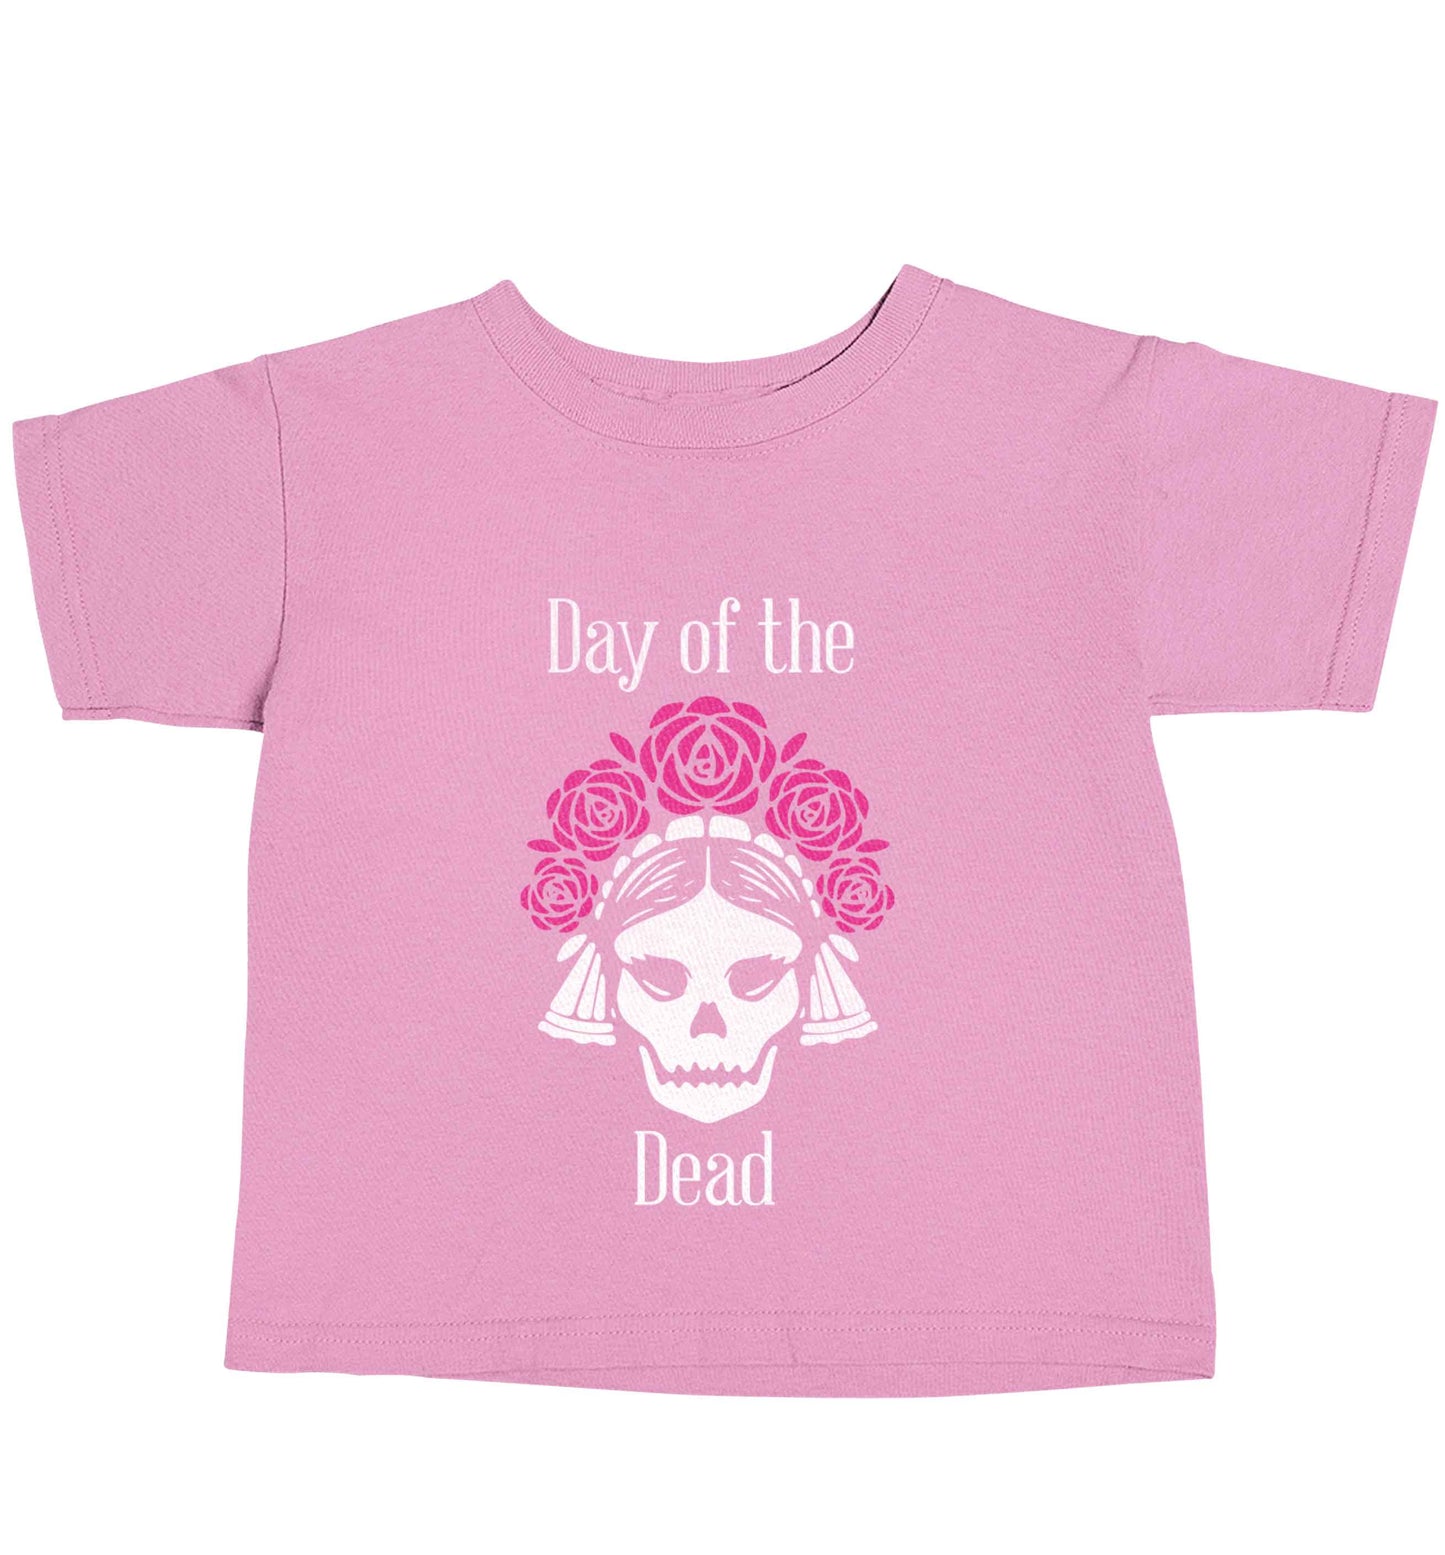 Day of the dead light pink baby toddler Tshirt 2 Years